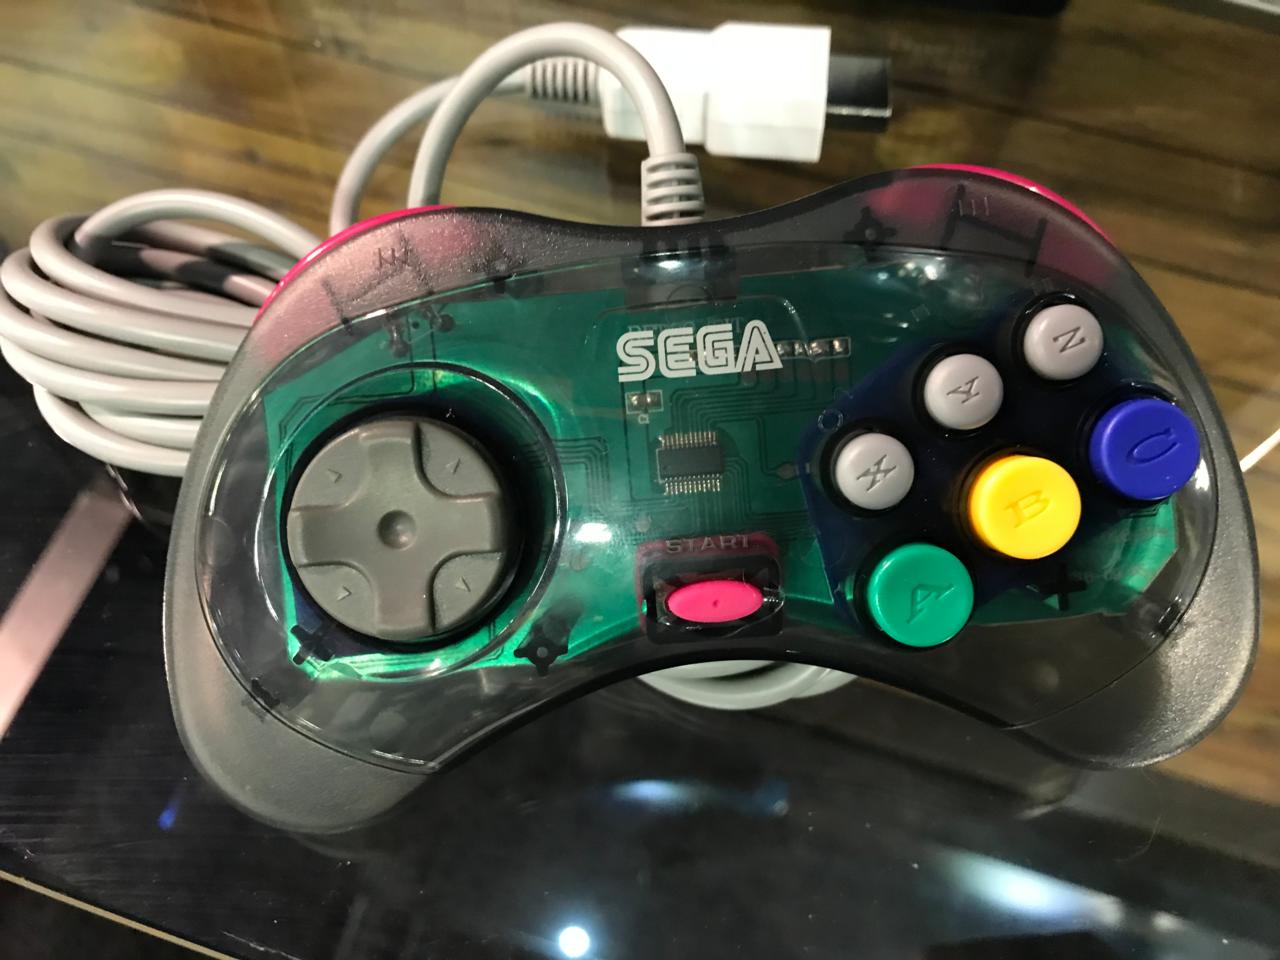 Wired Saturn Controllers